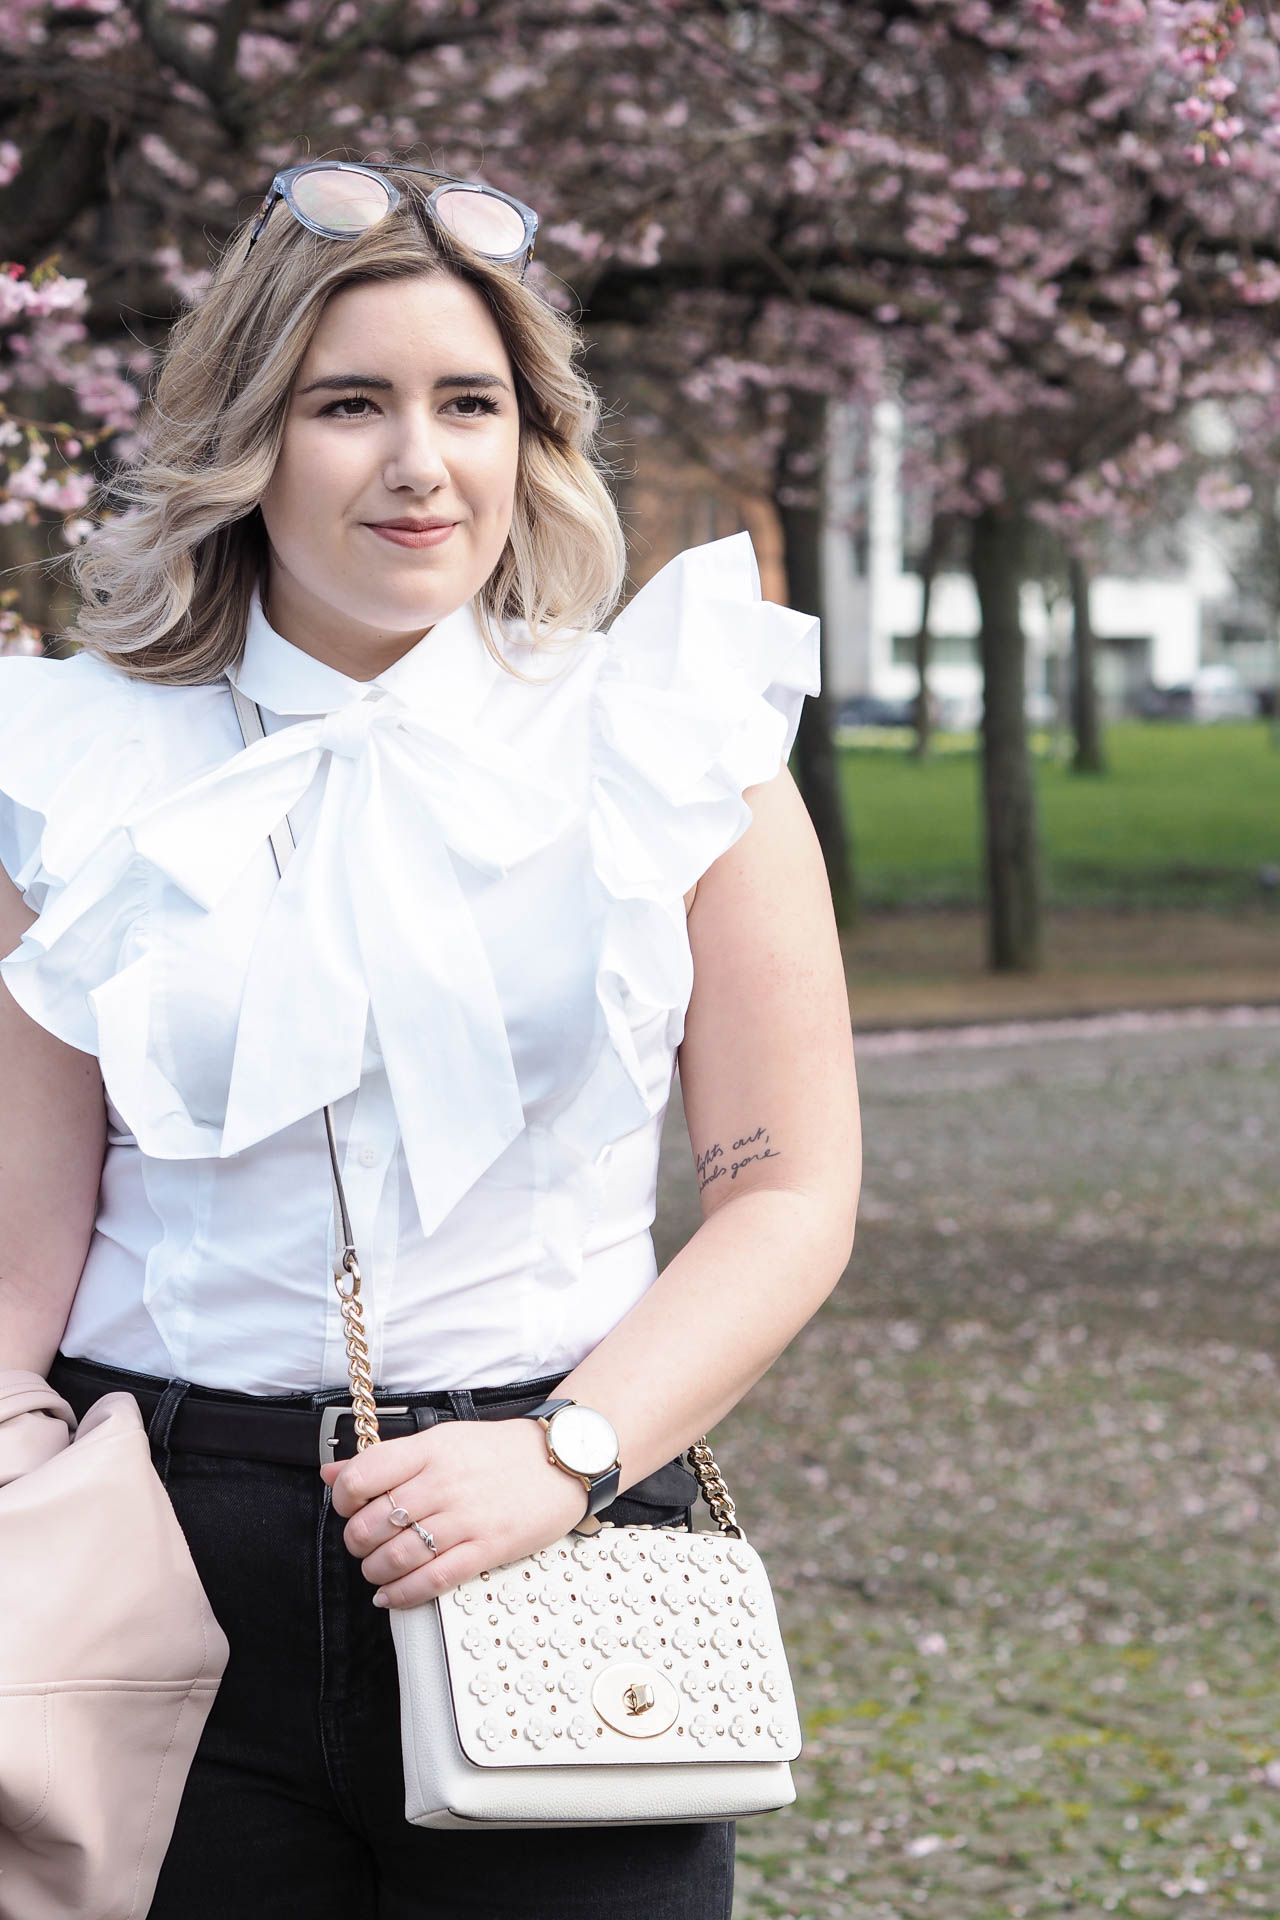 Spring fashion - styling the classic white shirt